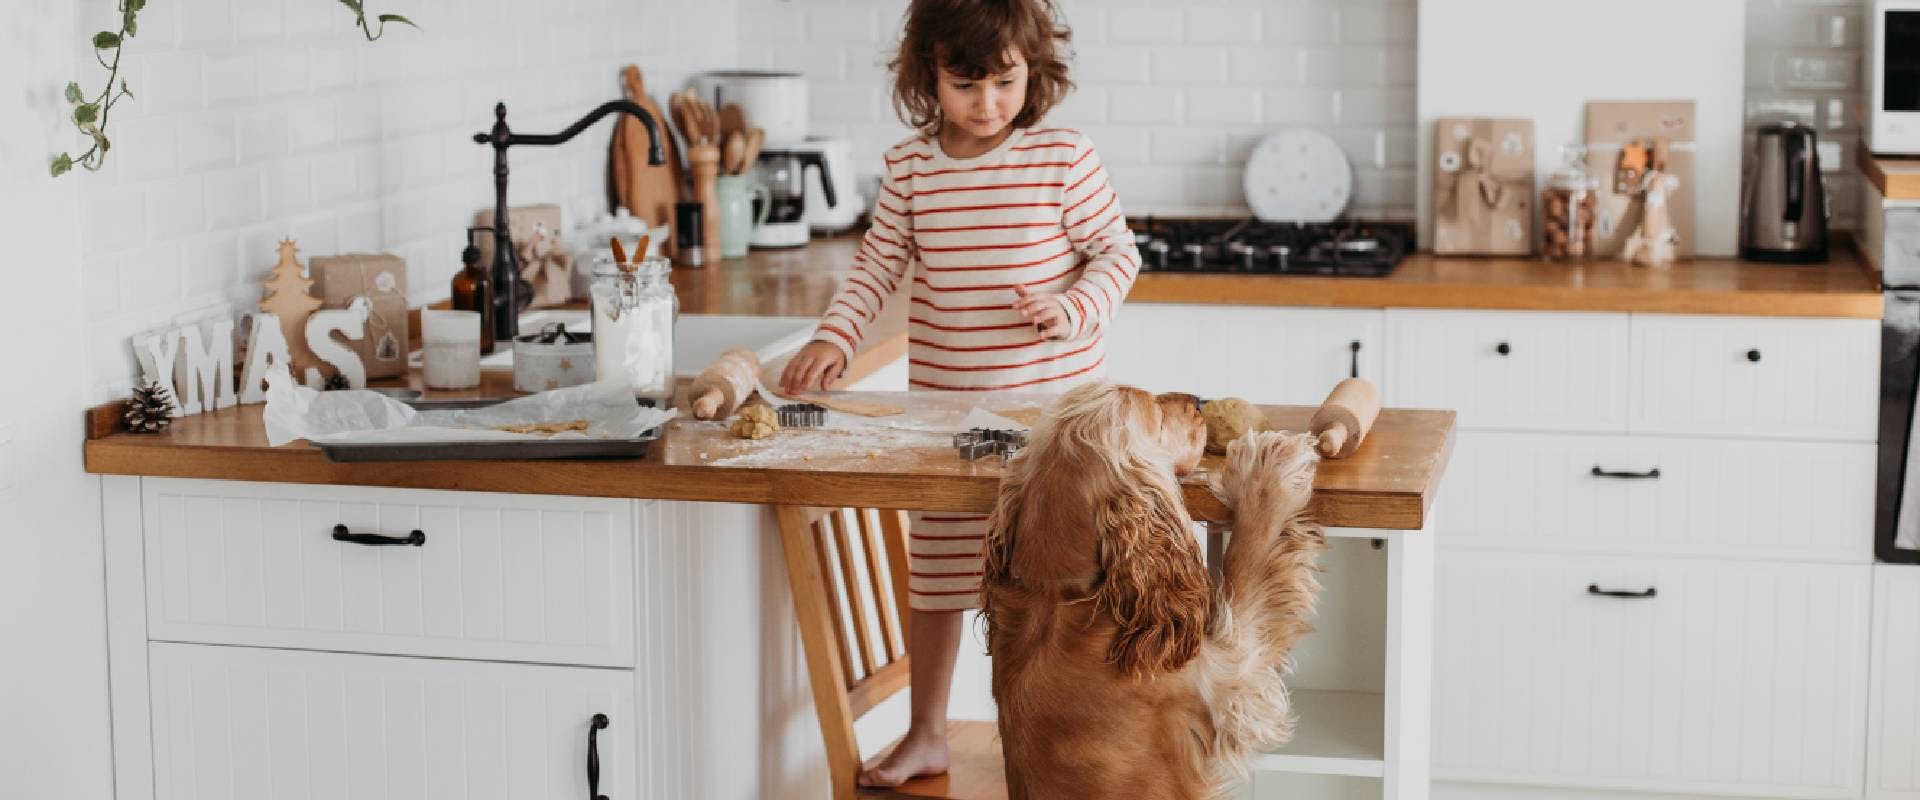 Young girl baking with her dog